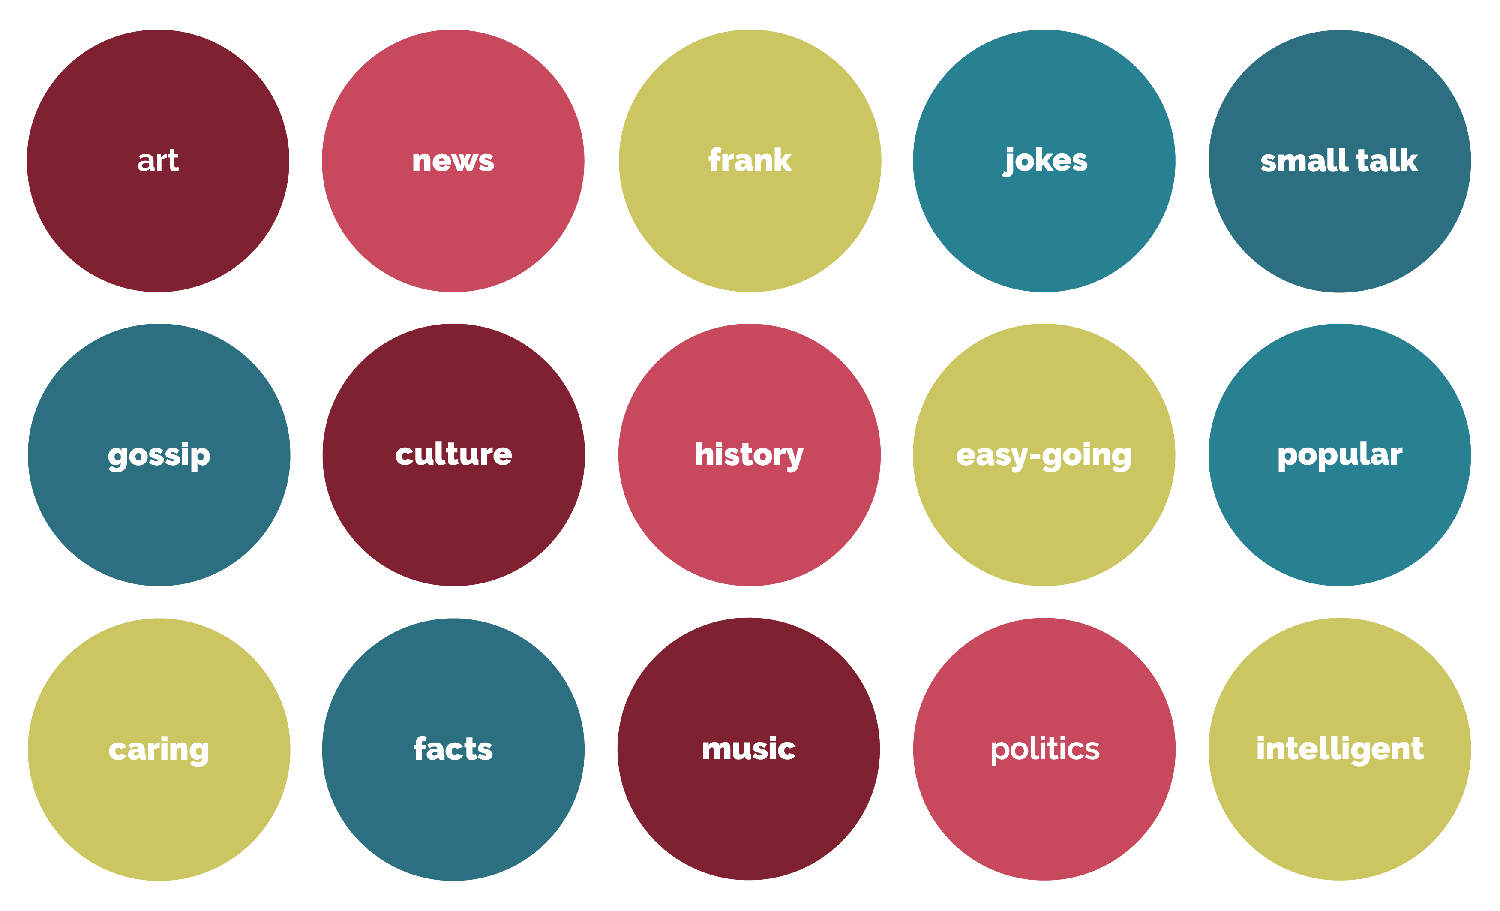 A graphical illustration showing the traits the brand can be associated with, grouped into different colours groups.